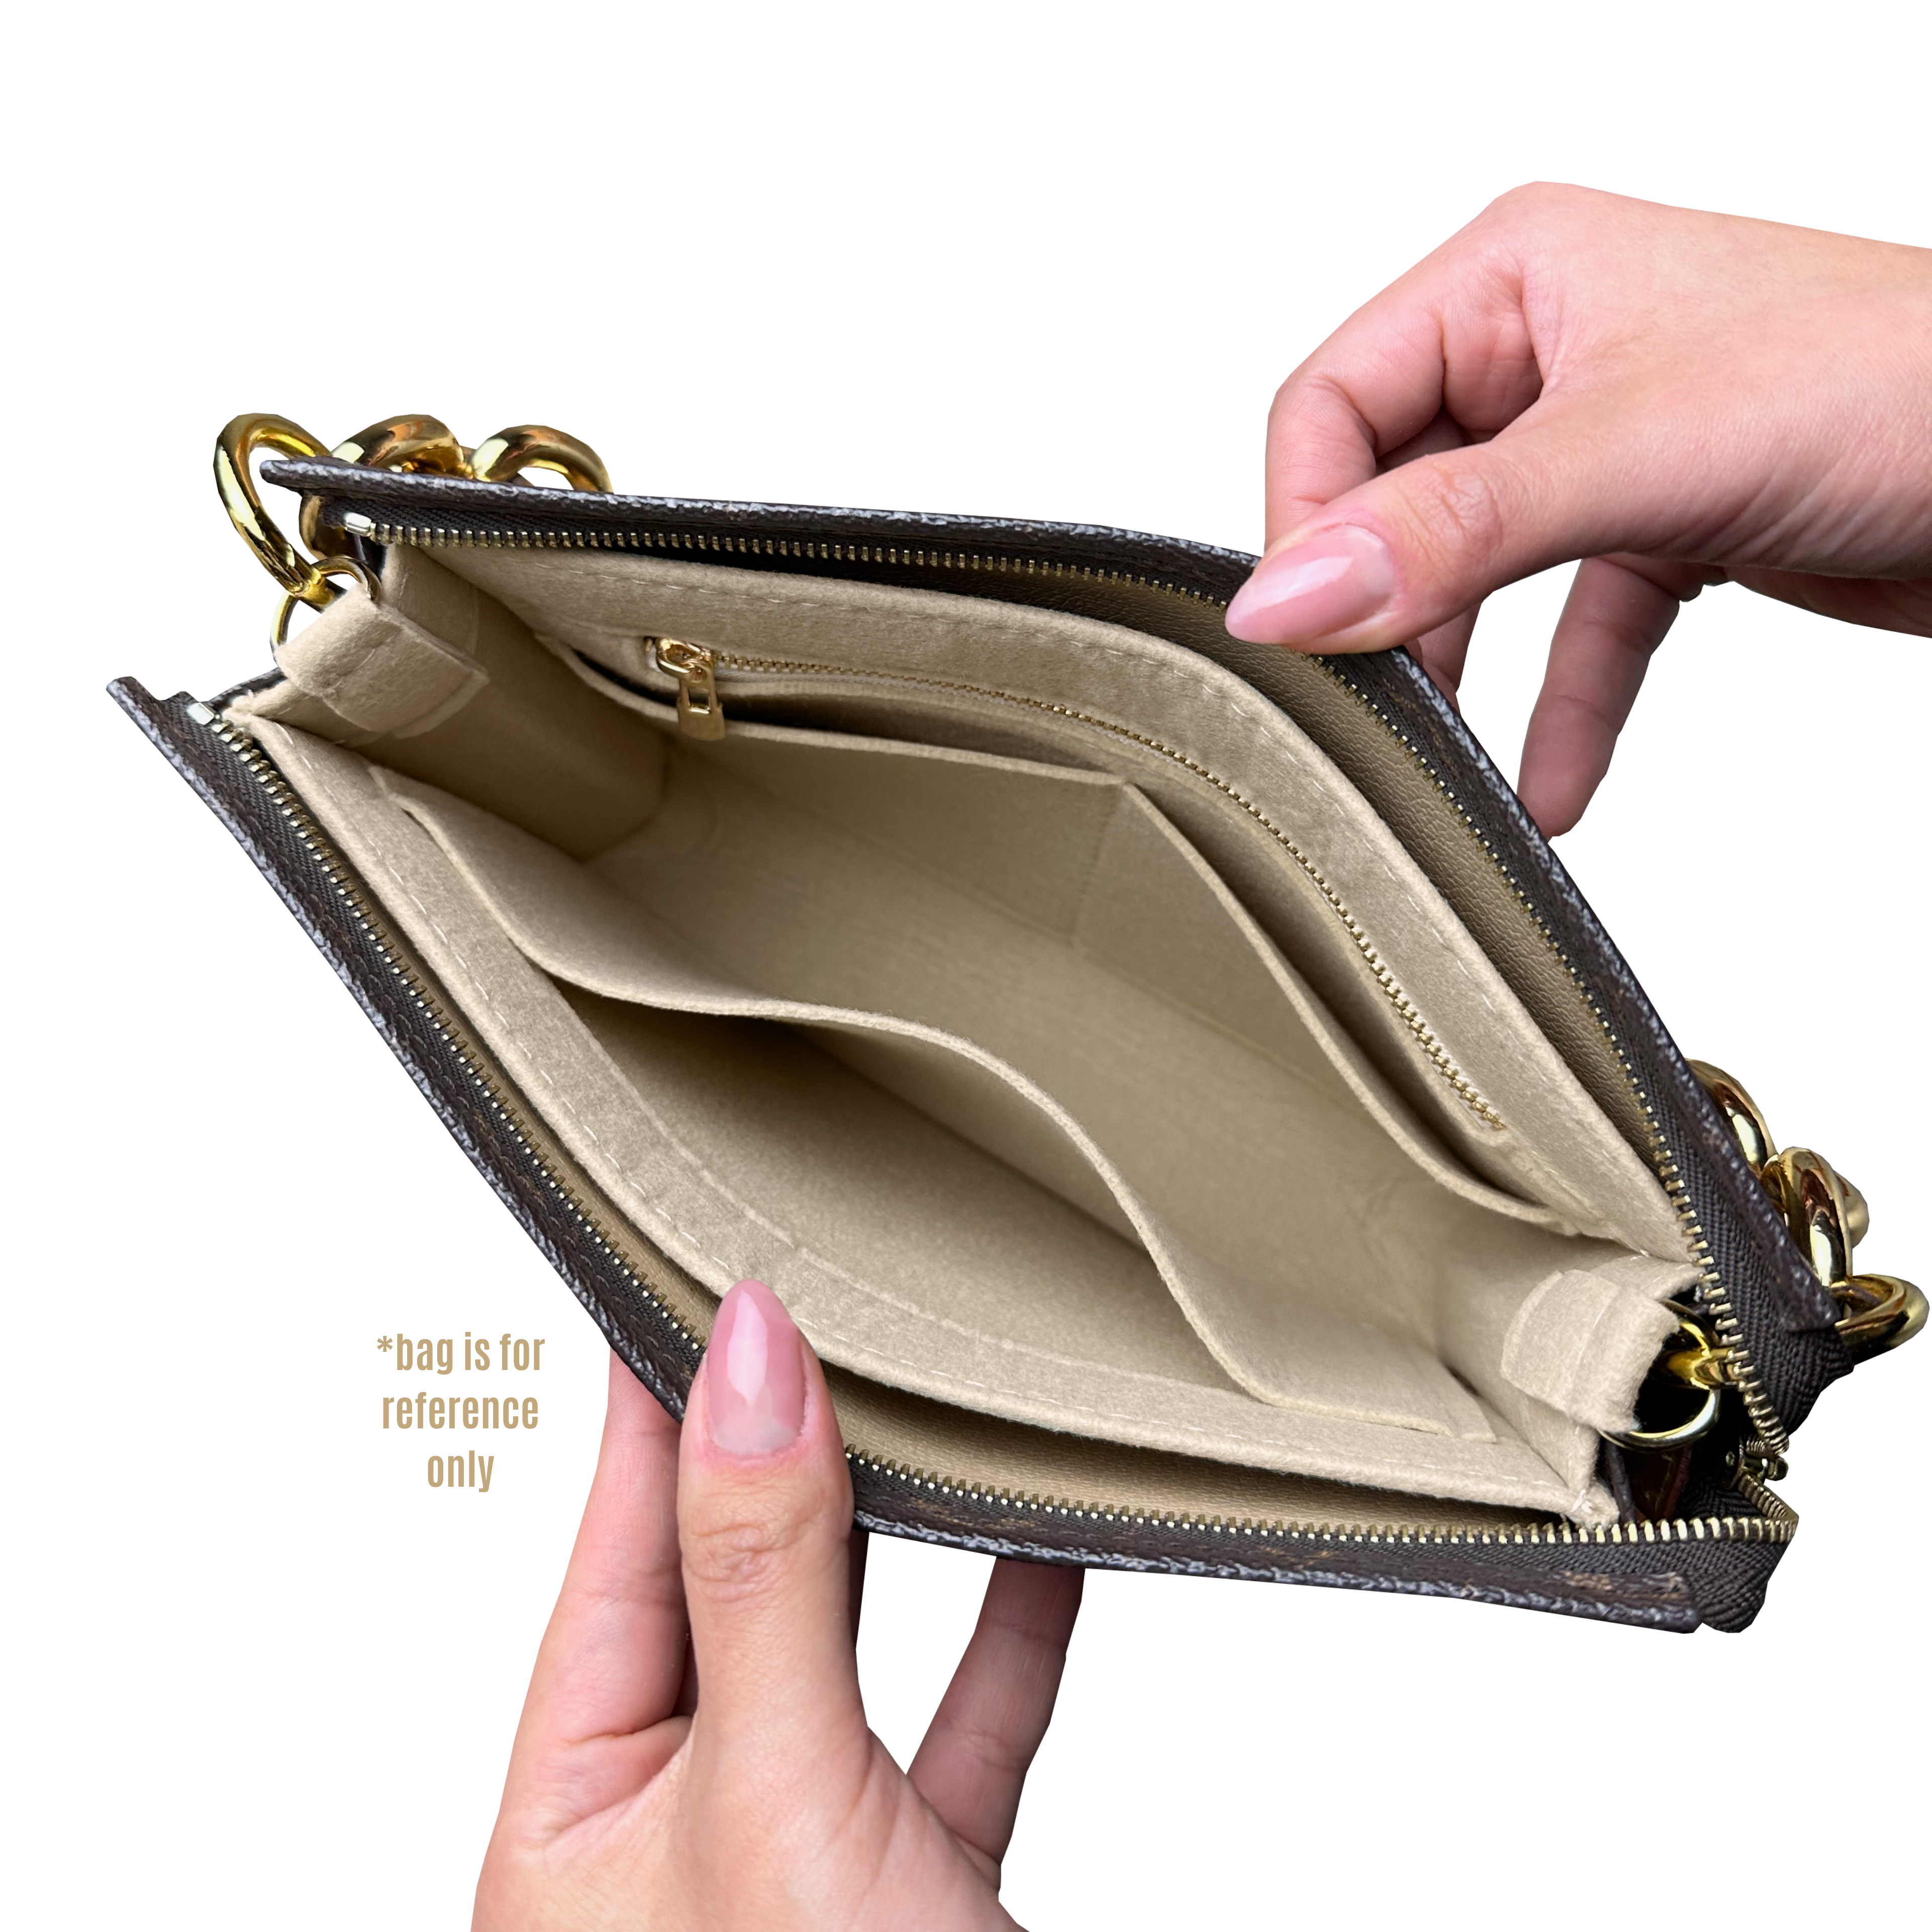 Divitize® Conversion Kit for Toiletry Pouch 26 (with gold or silver chain)